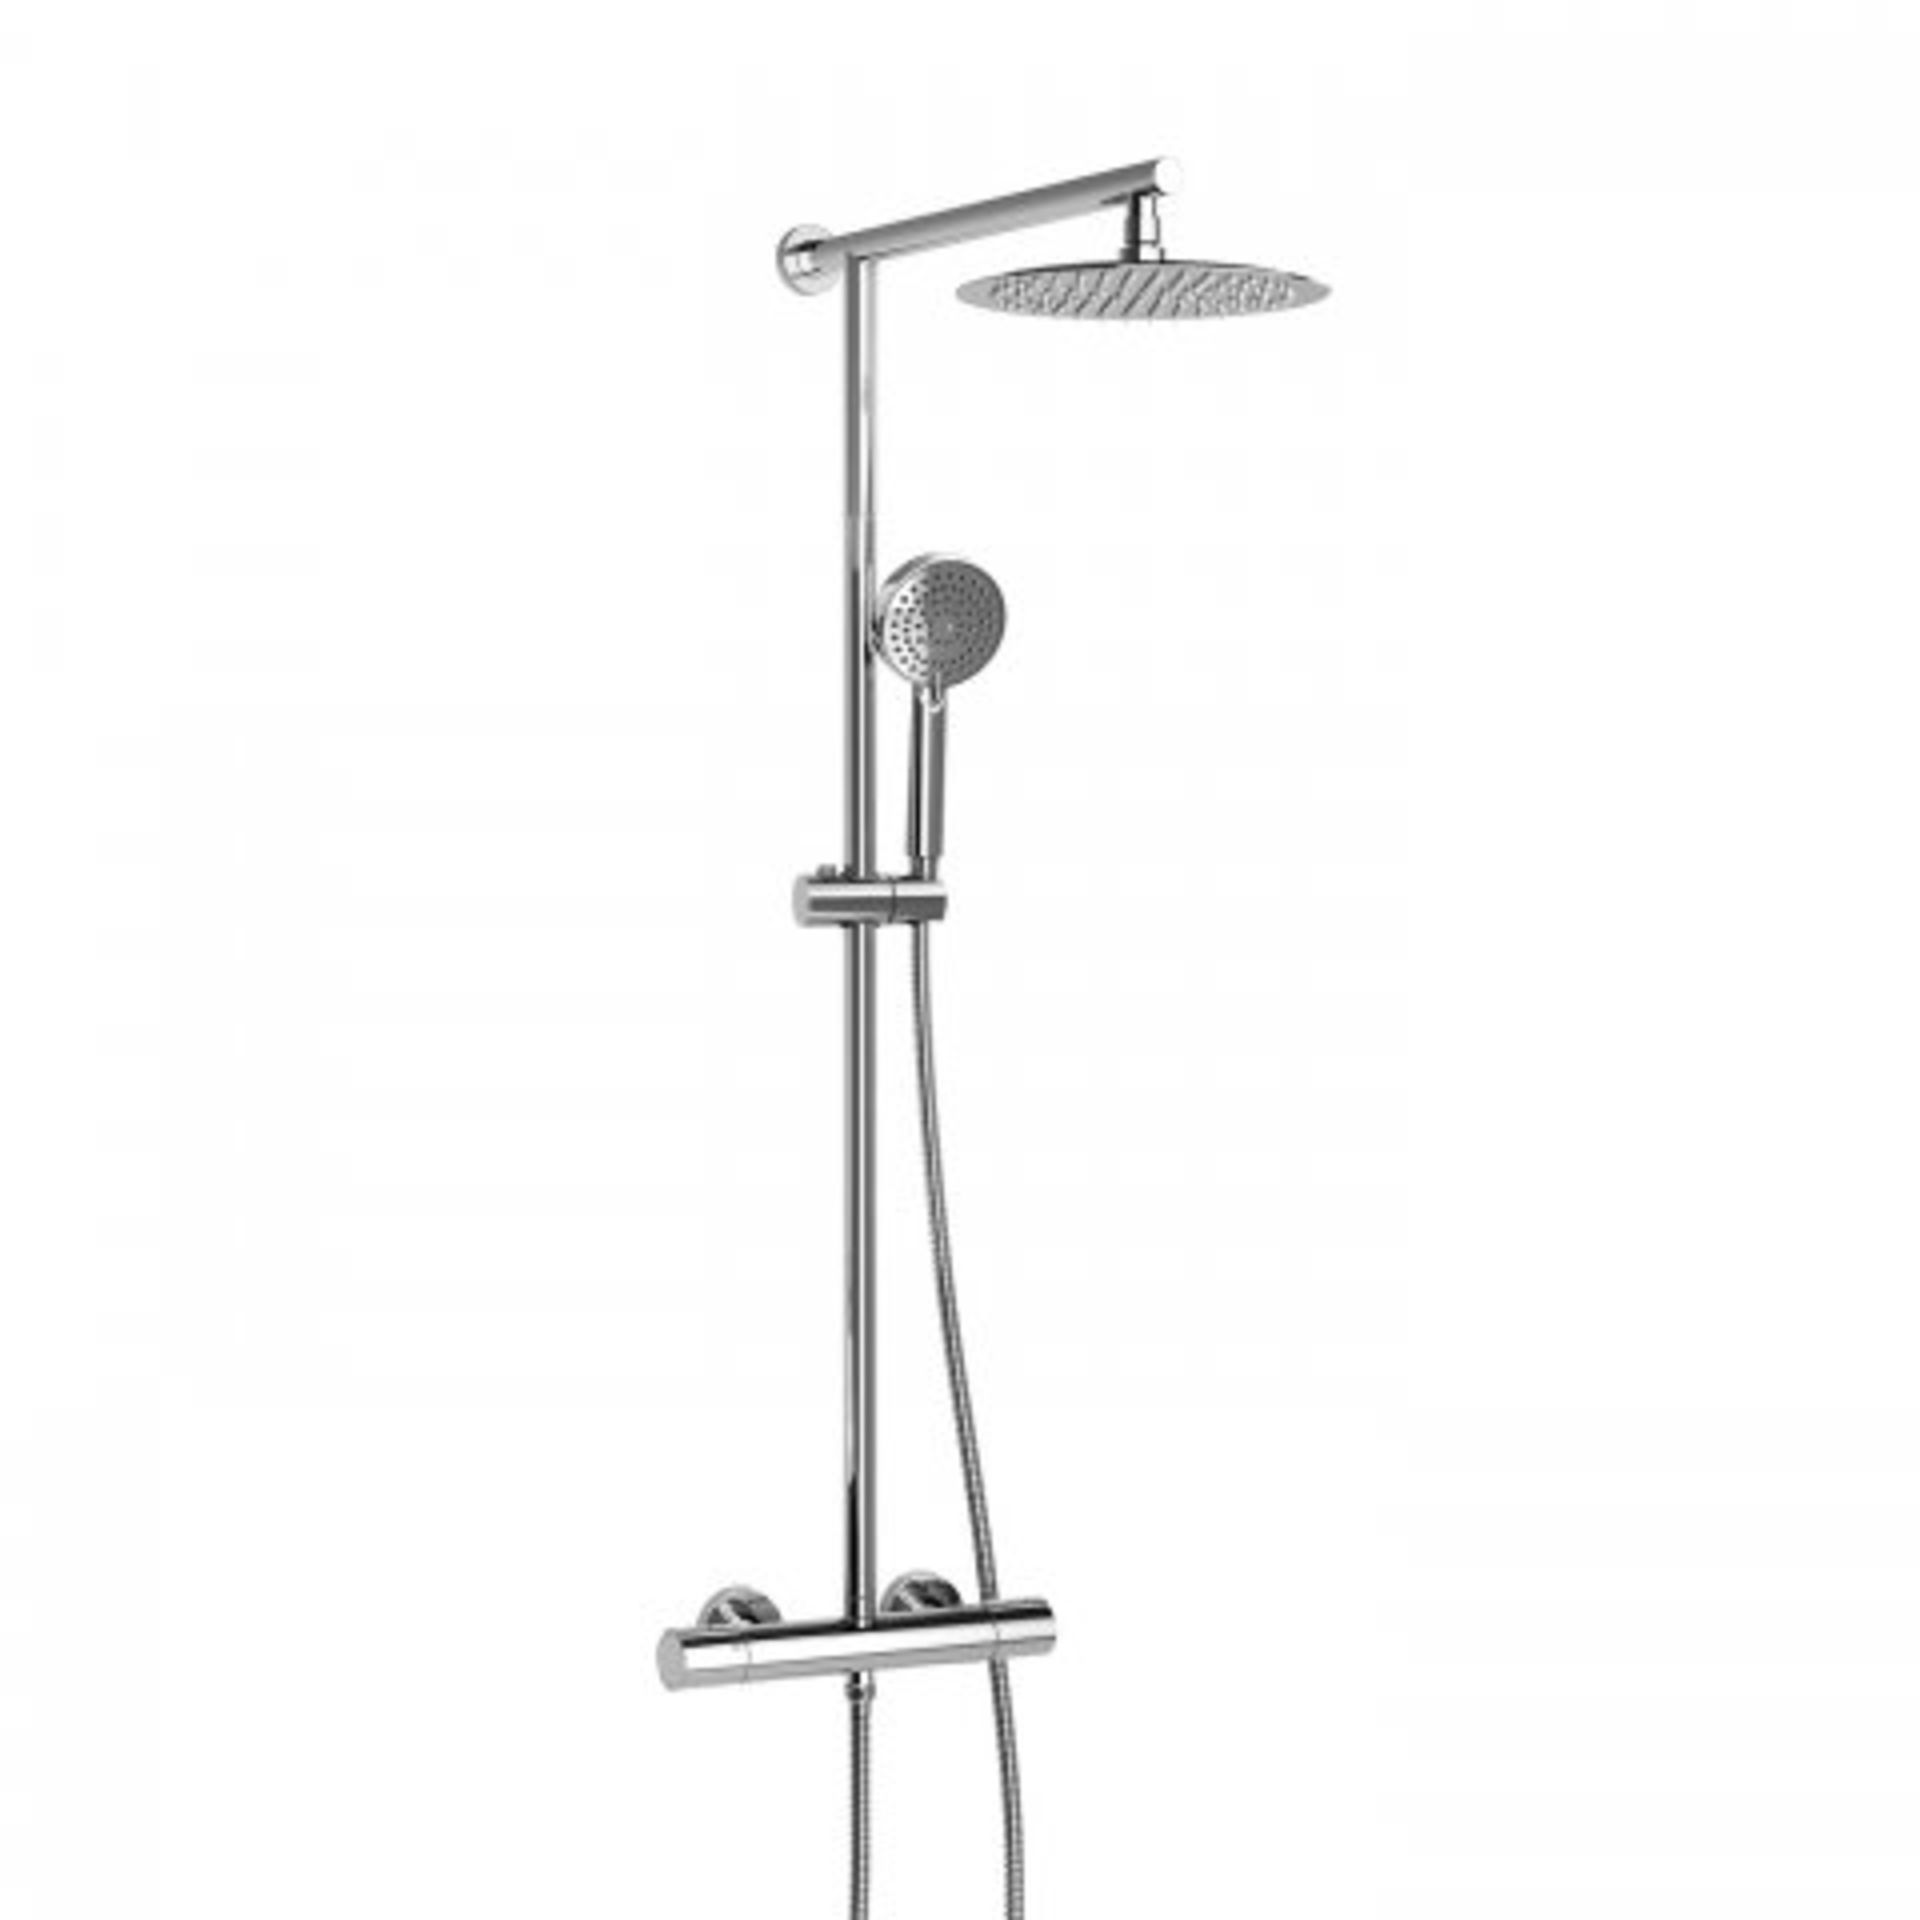 (P42) : 250mm Large Round Head Thermostatic Exposed Shower Kit & Handheld. RRP £299.99. Designer - Image 3 of 5